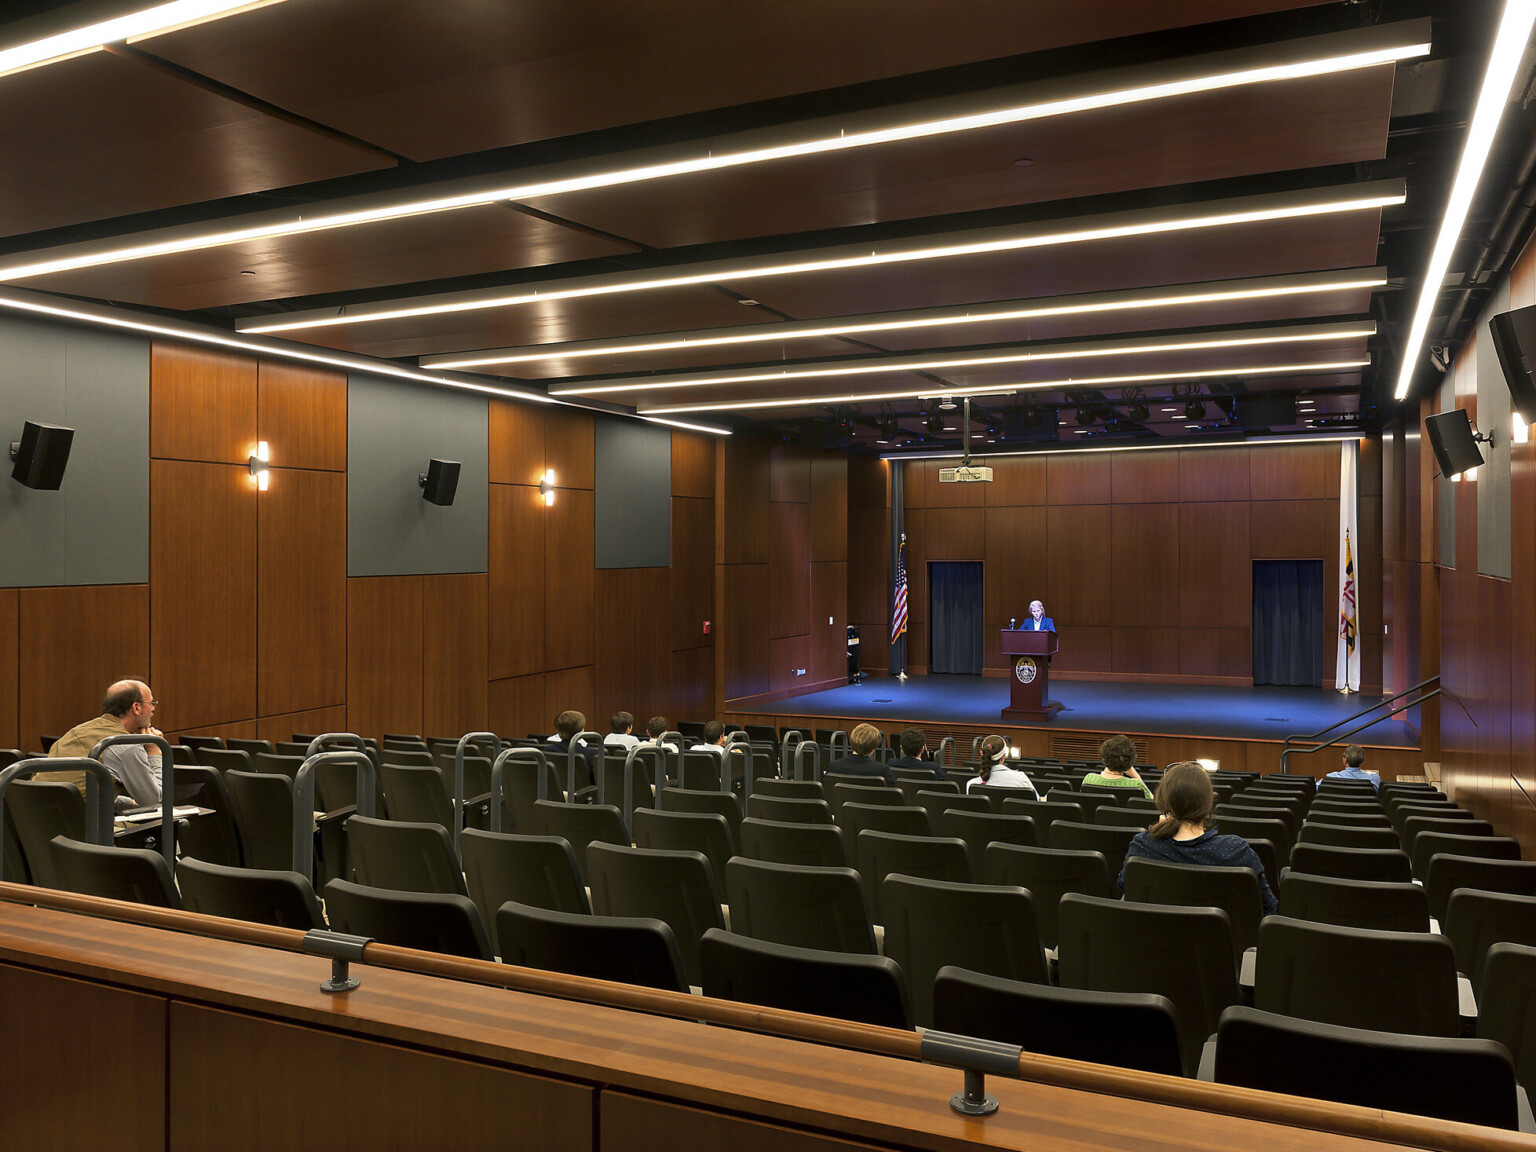 theater with black seating, acoustic panel ceiling, custom overhead lighting and sound system, wooden stage with podium